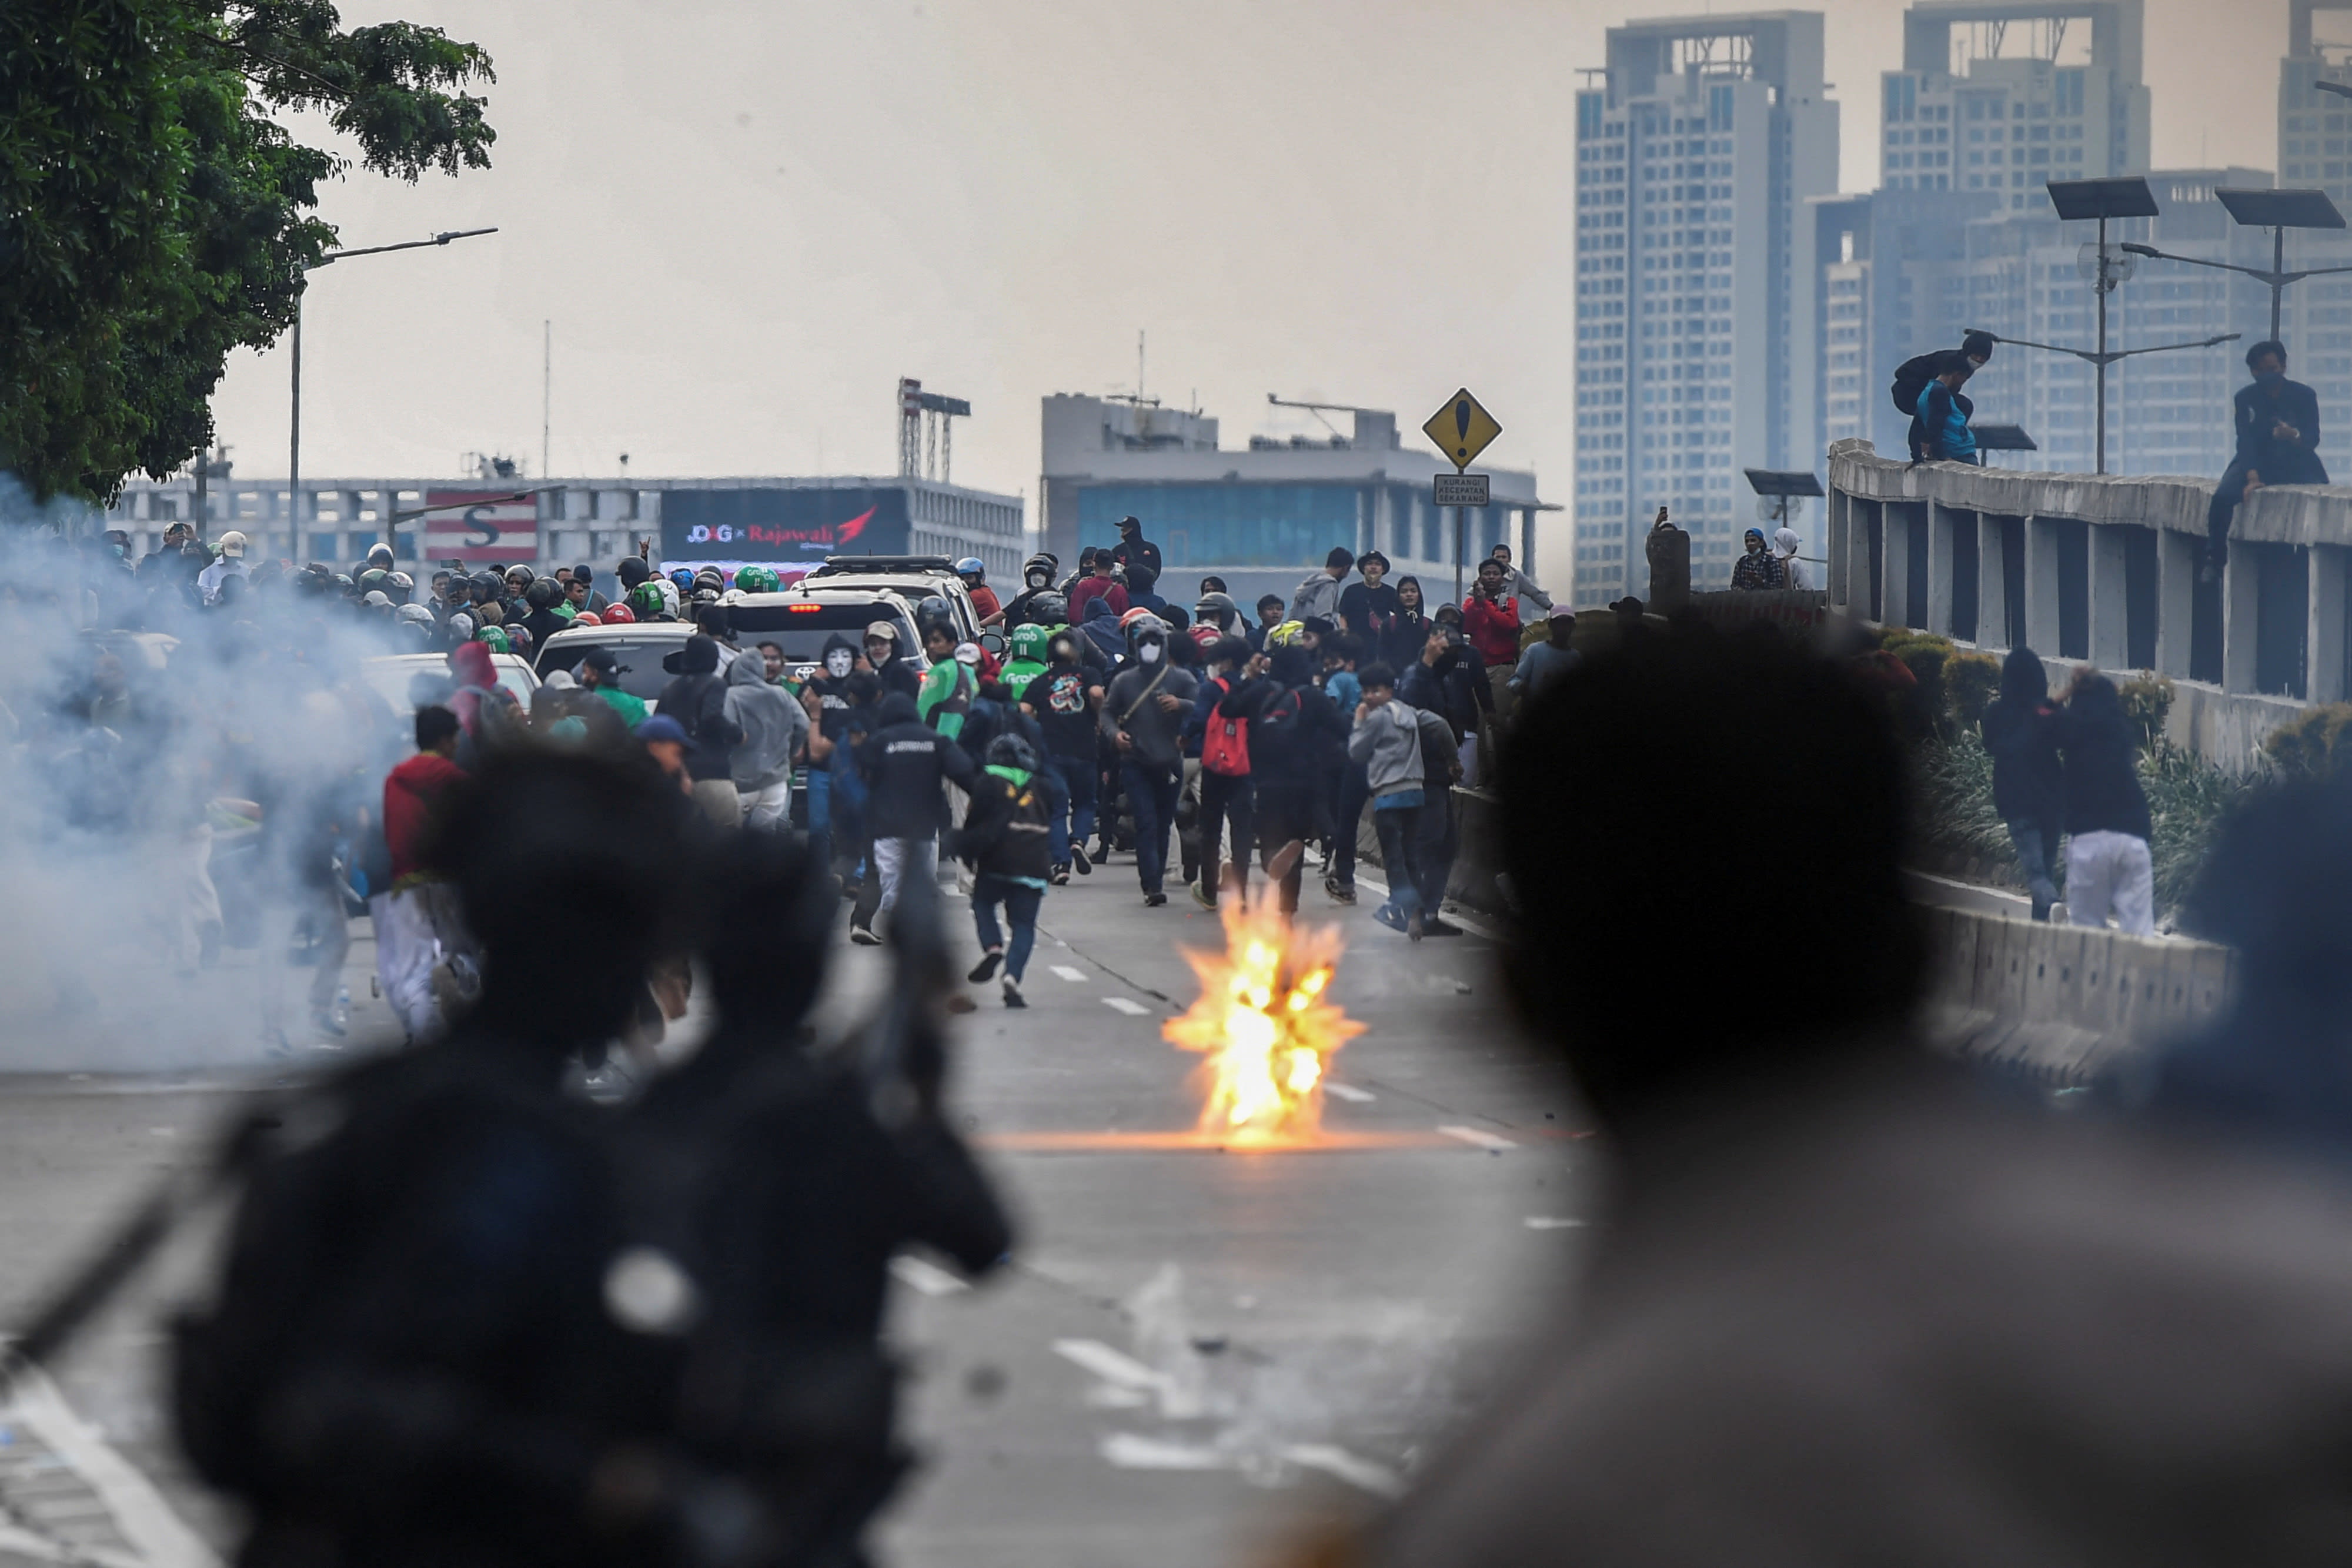 Protesters run away as riot police officers fire tear gas, during a rally against proposals floated by some ministers to extend Indonesian president Joko Widodo's term and postpone the 2024 election, near the Parliament building in Jakarta, Indonesia on April 11, 2022. 